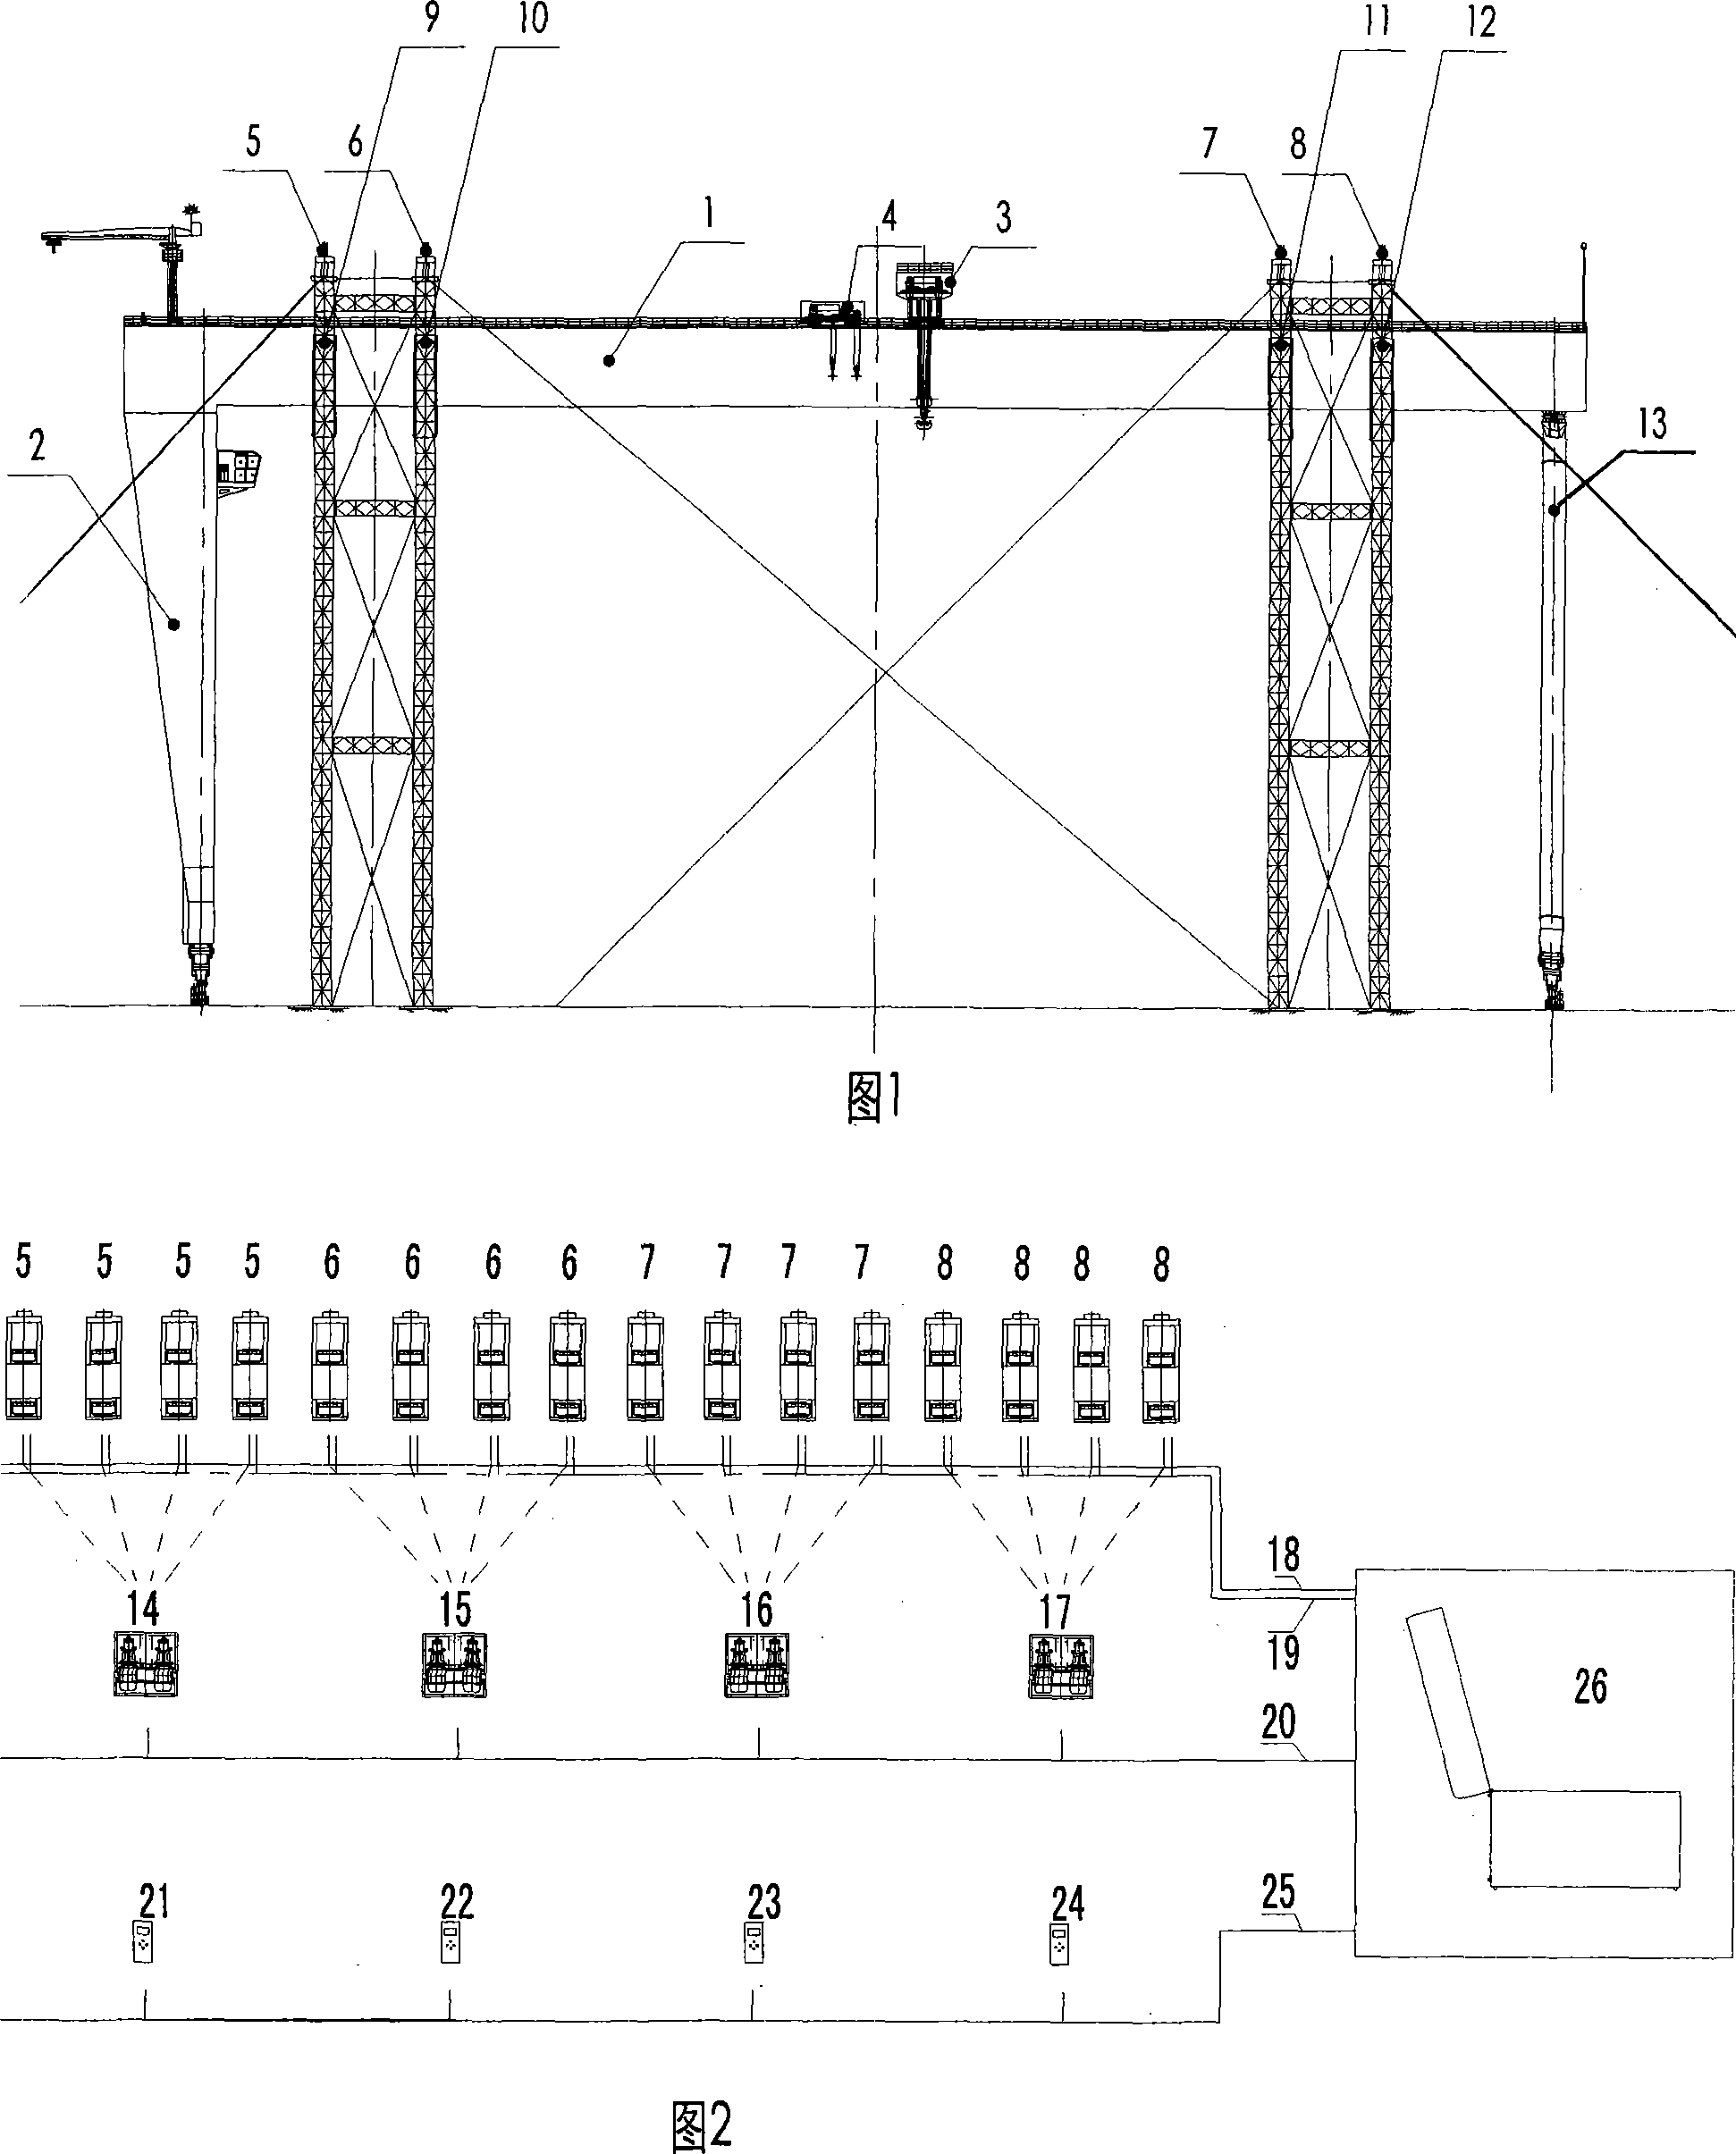 Process of installing multiple-tower combination of gantry